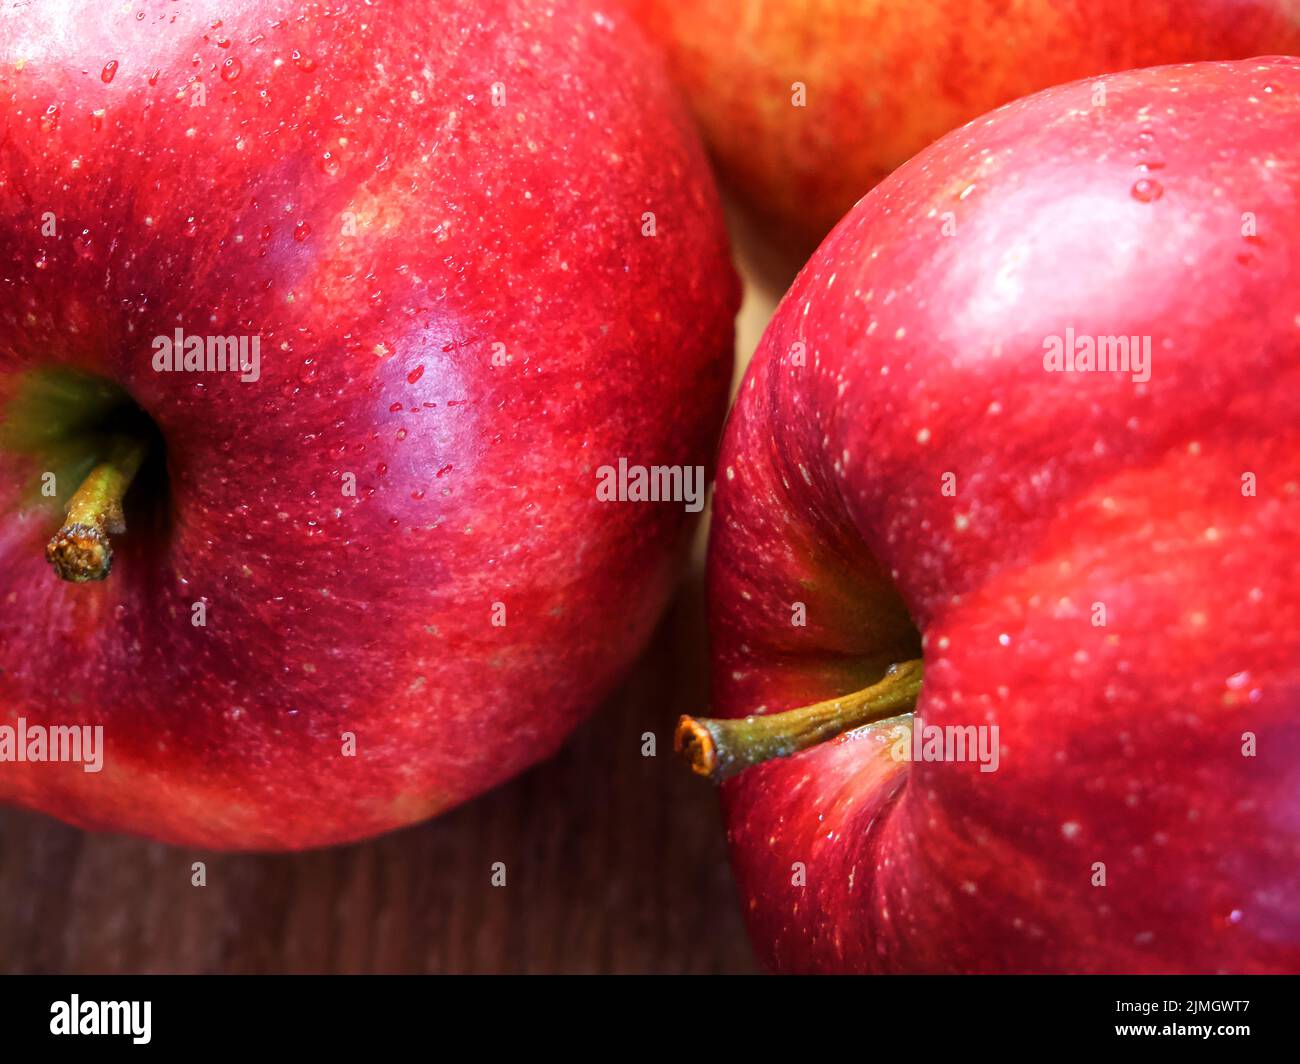 Delicious red apples photographed in macro. Juicy Red Apple Stock Photo